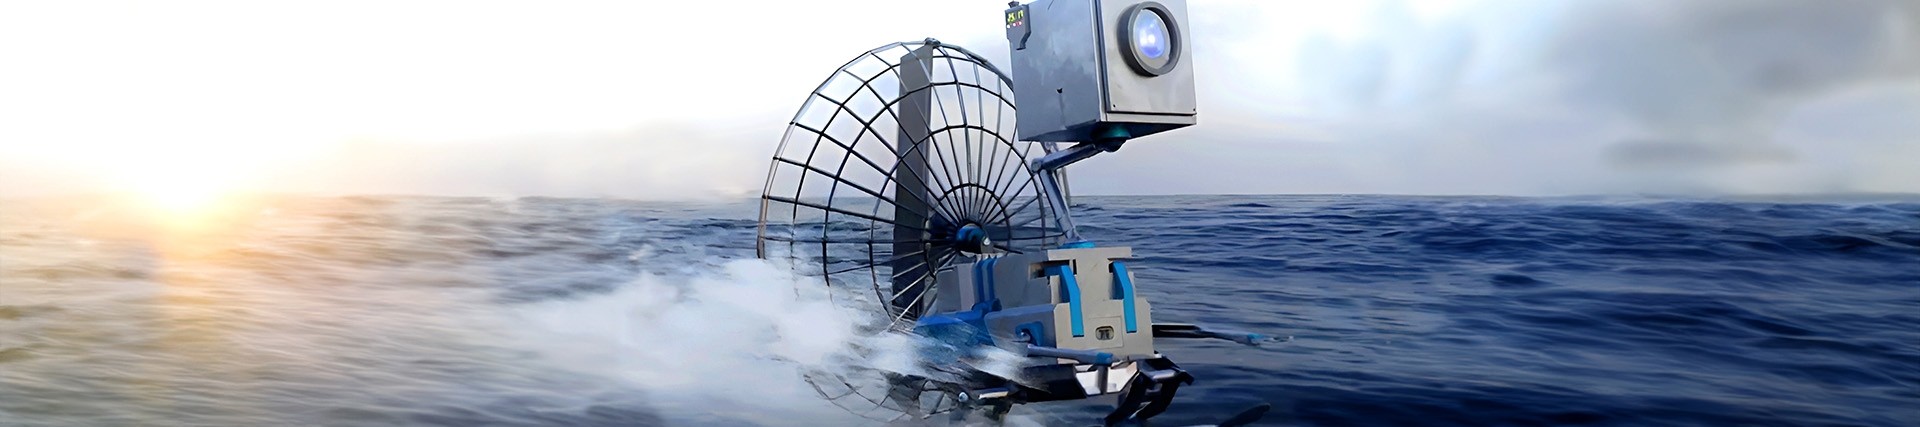 Digital art: a robot similar to Wall-E on water skis with a propeller in a metal cage attached at the back; water spraying up from the sea suggests its moving quickly. 